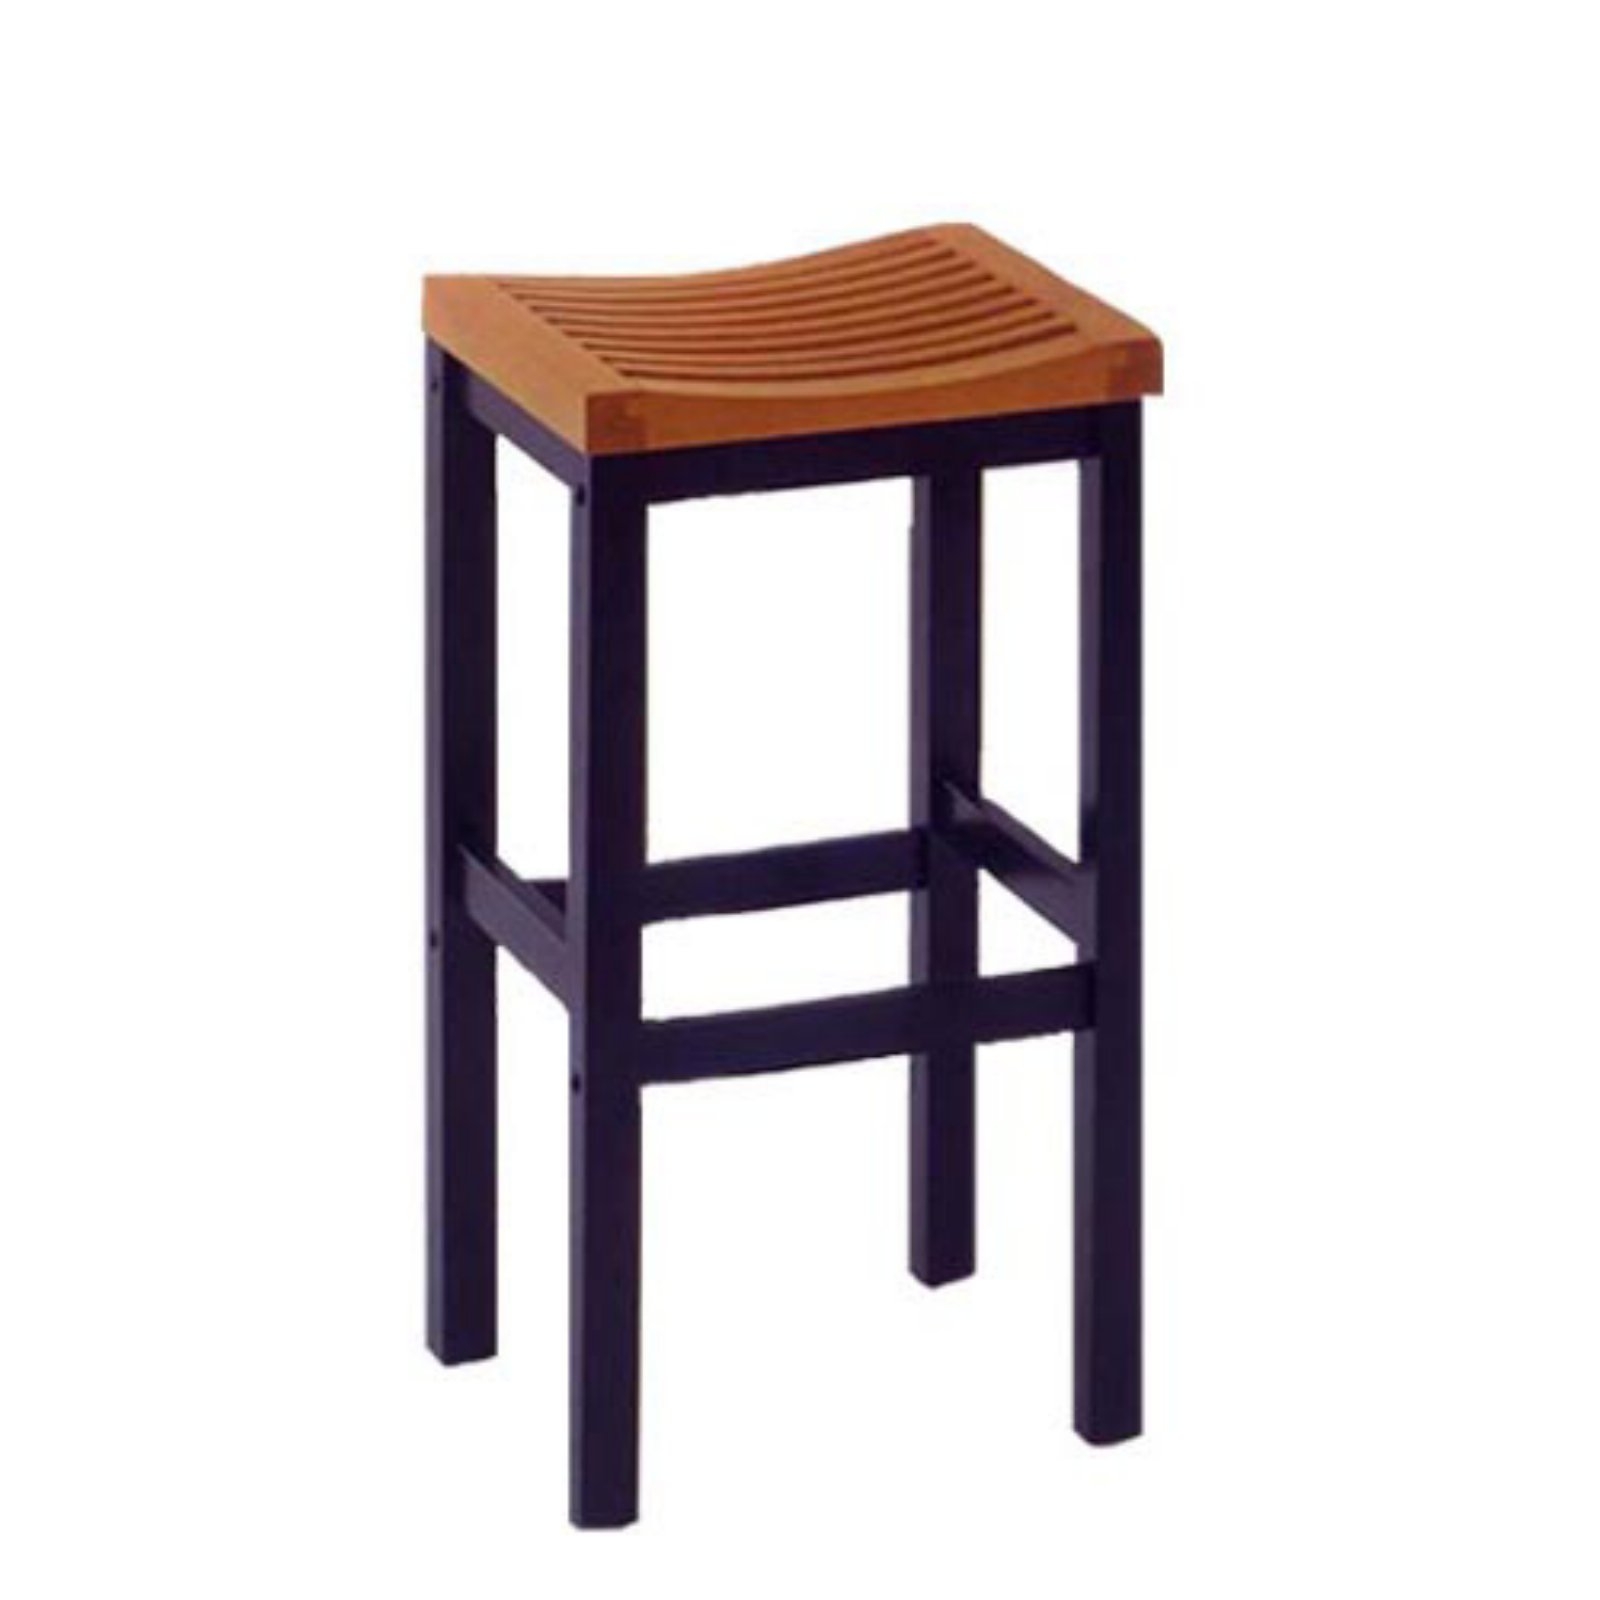 Home Style 5635-88 Black and Cottage Oak Finish Bar Stool, 24-Inch